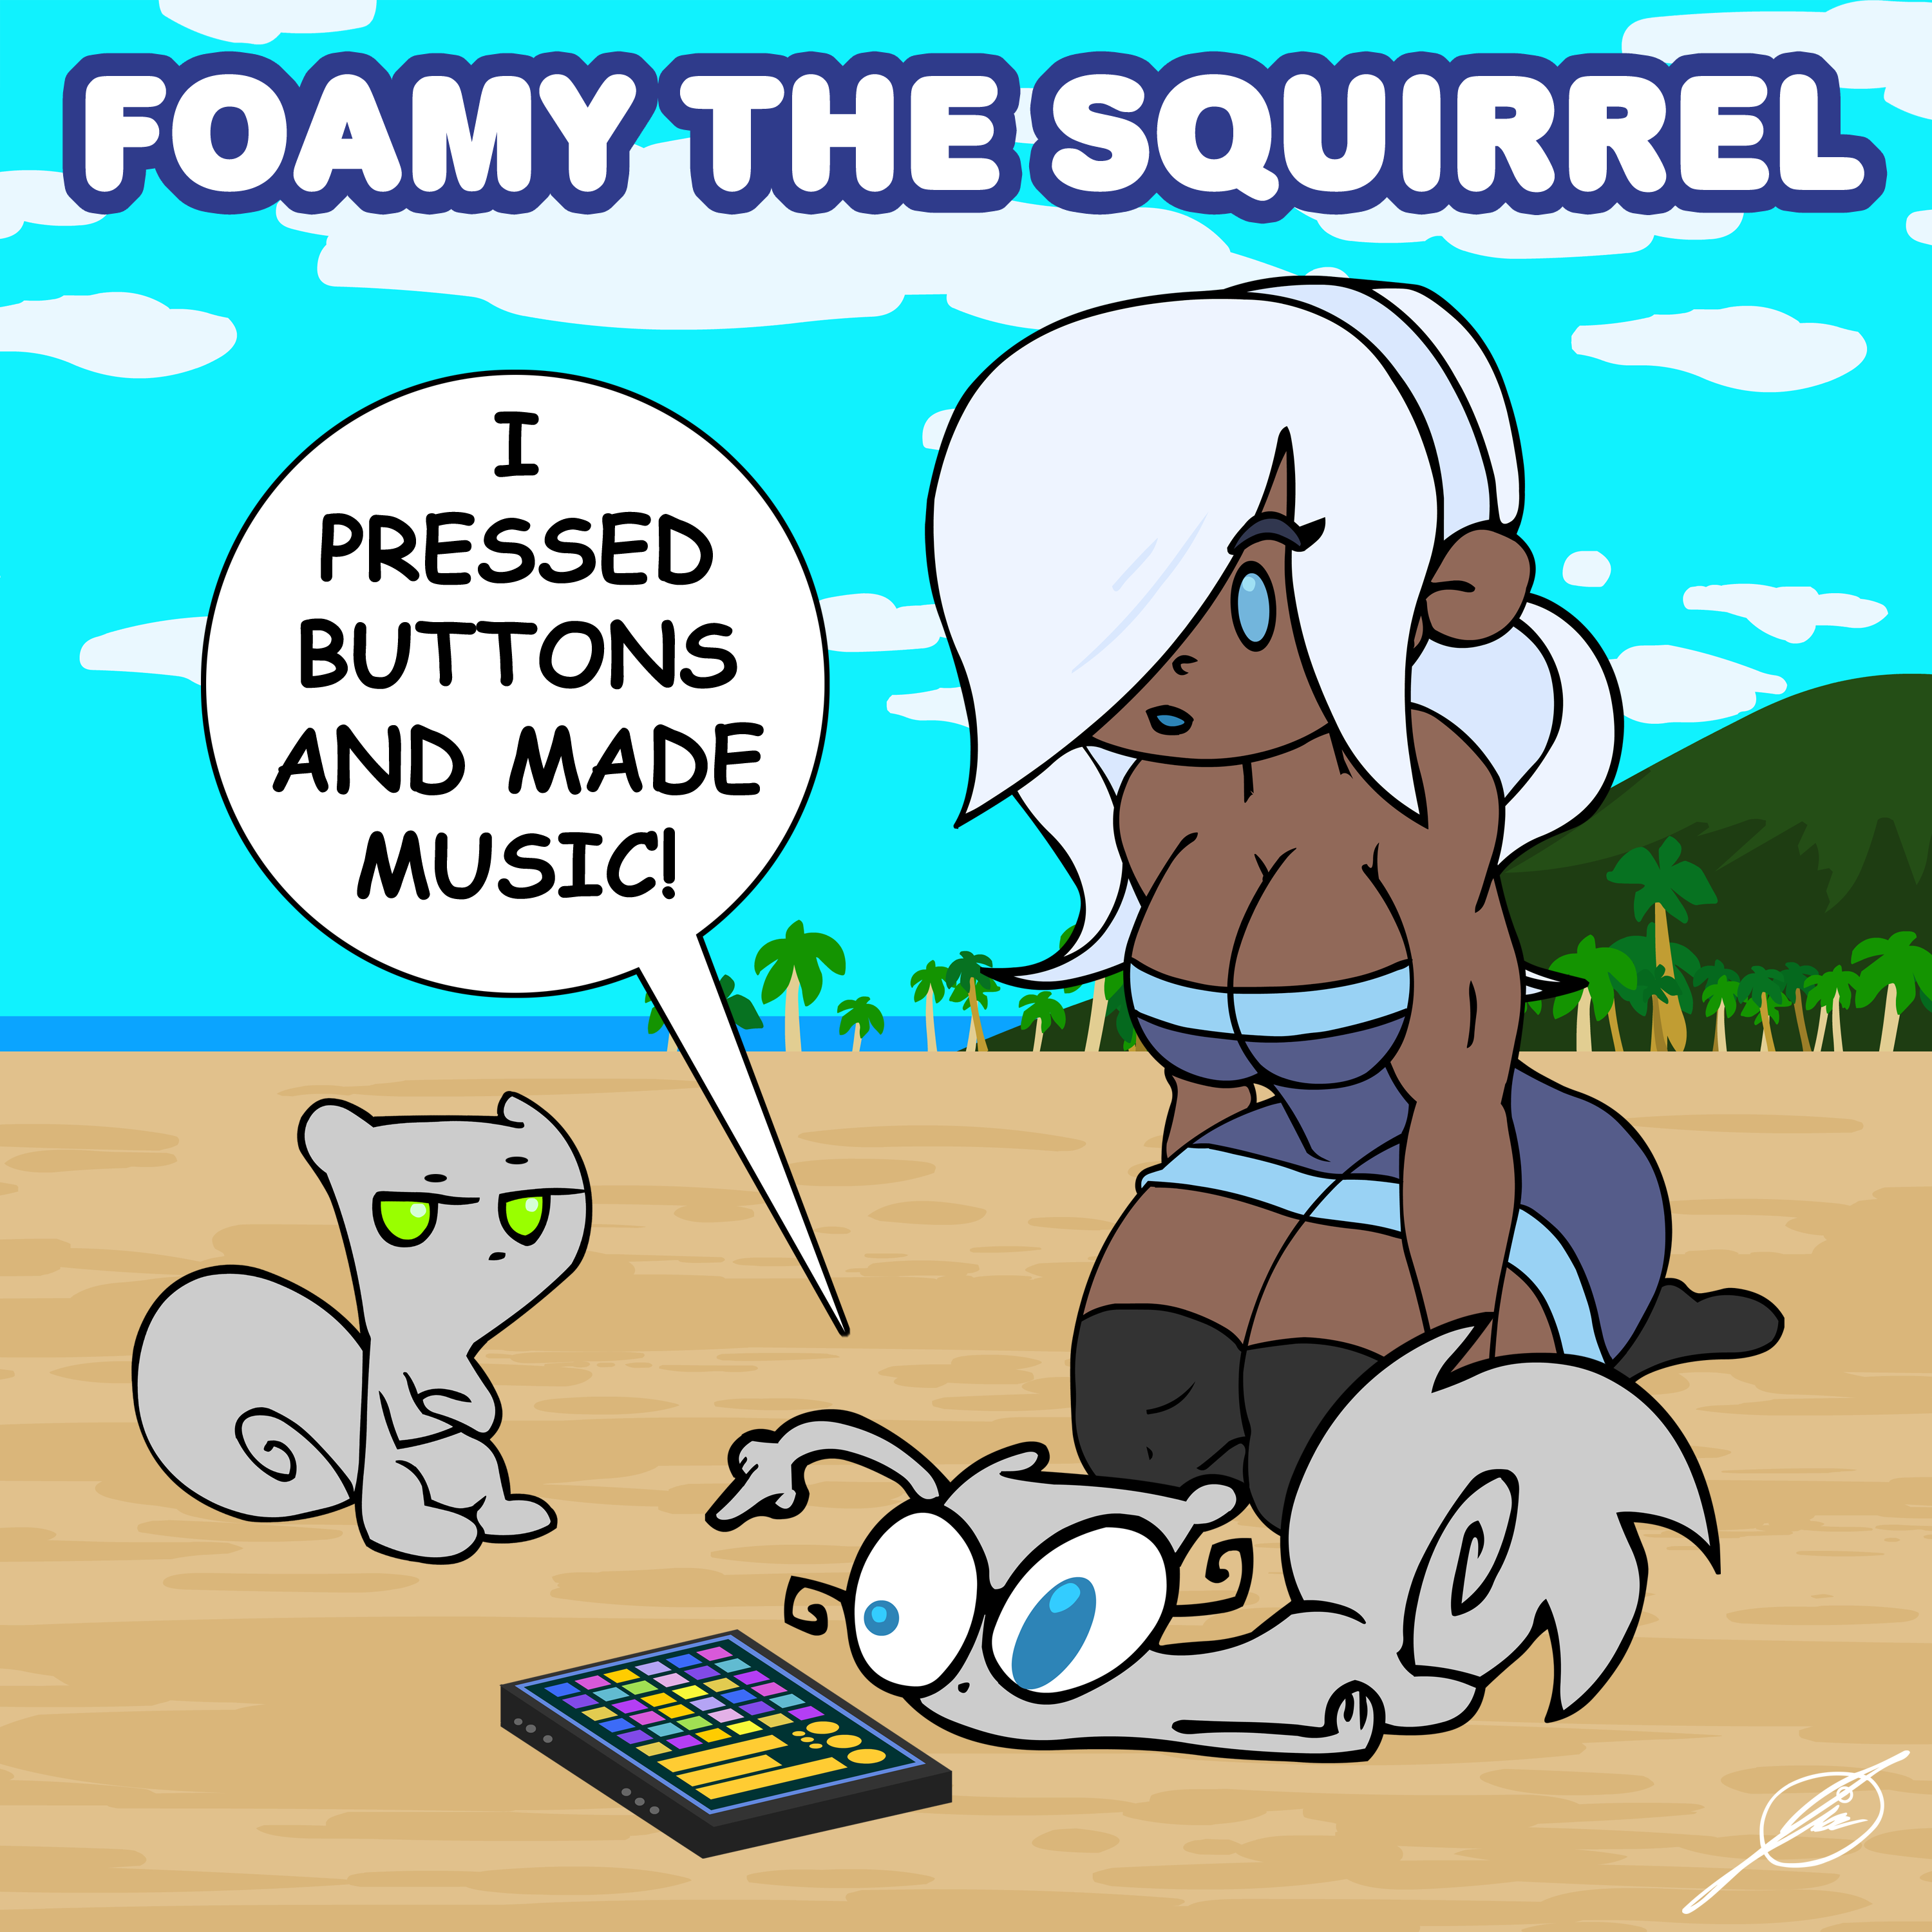 I Pressed Buttons and Made Music : Foamy The Squirrel